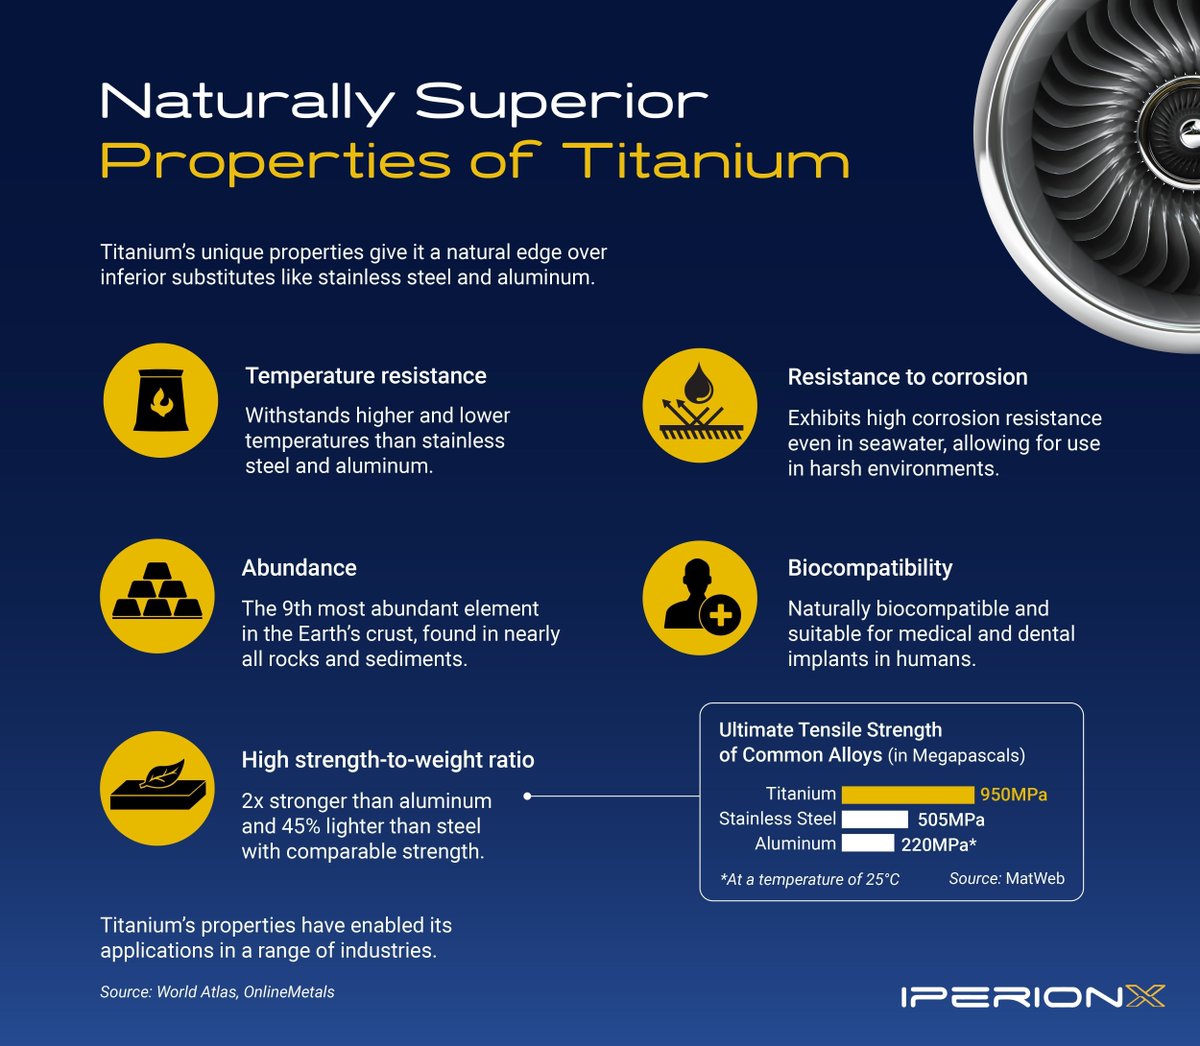 Titanium is well-suited for a wide variety of industries due to its naturally superior properties, however high production costs have held back its widespread use. At @iperionx, we aim to produce low cost, low carbon, sustainable titanium metal for a variety of U.S. industries.